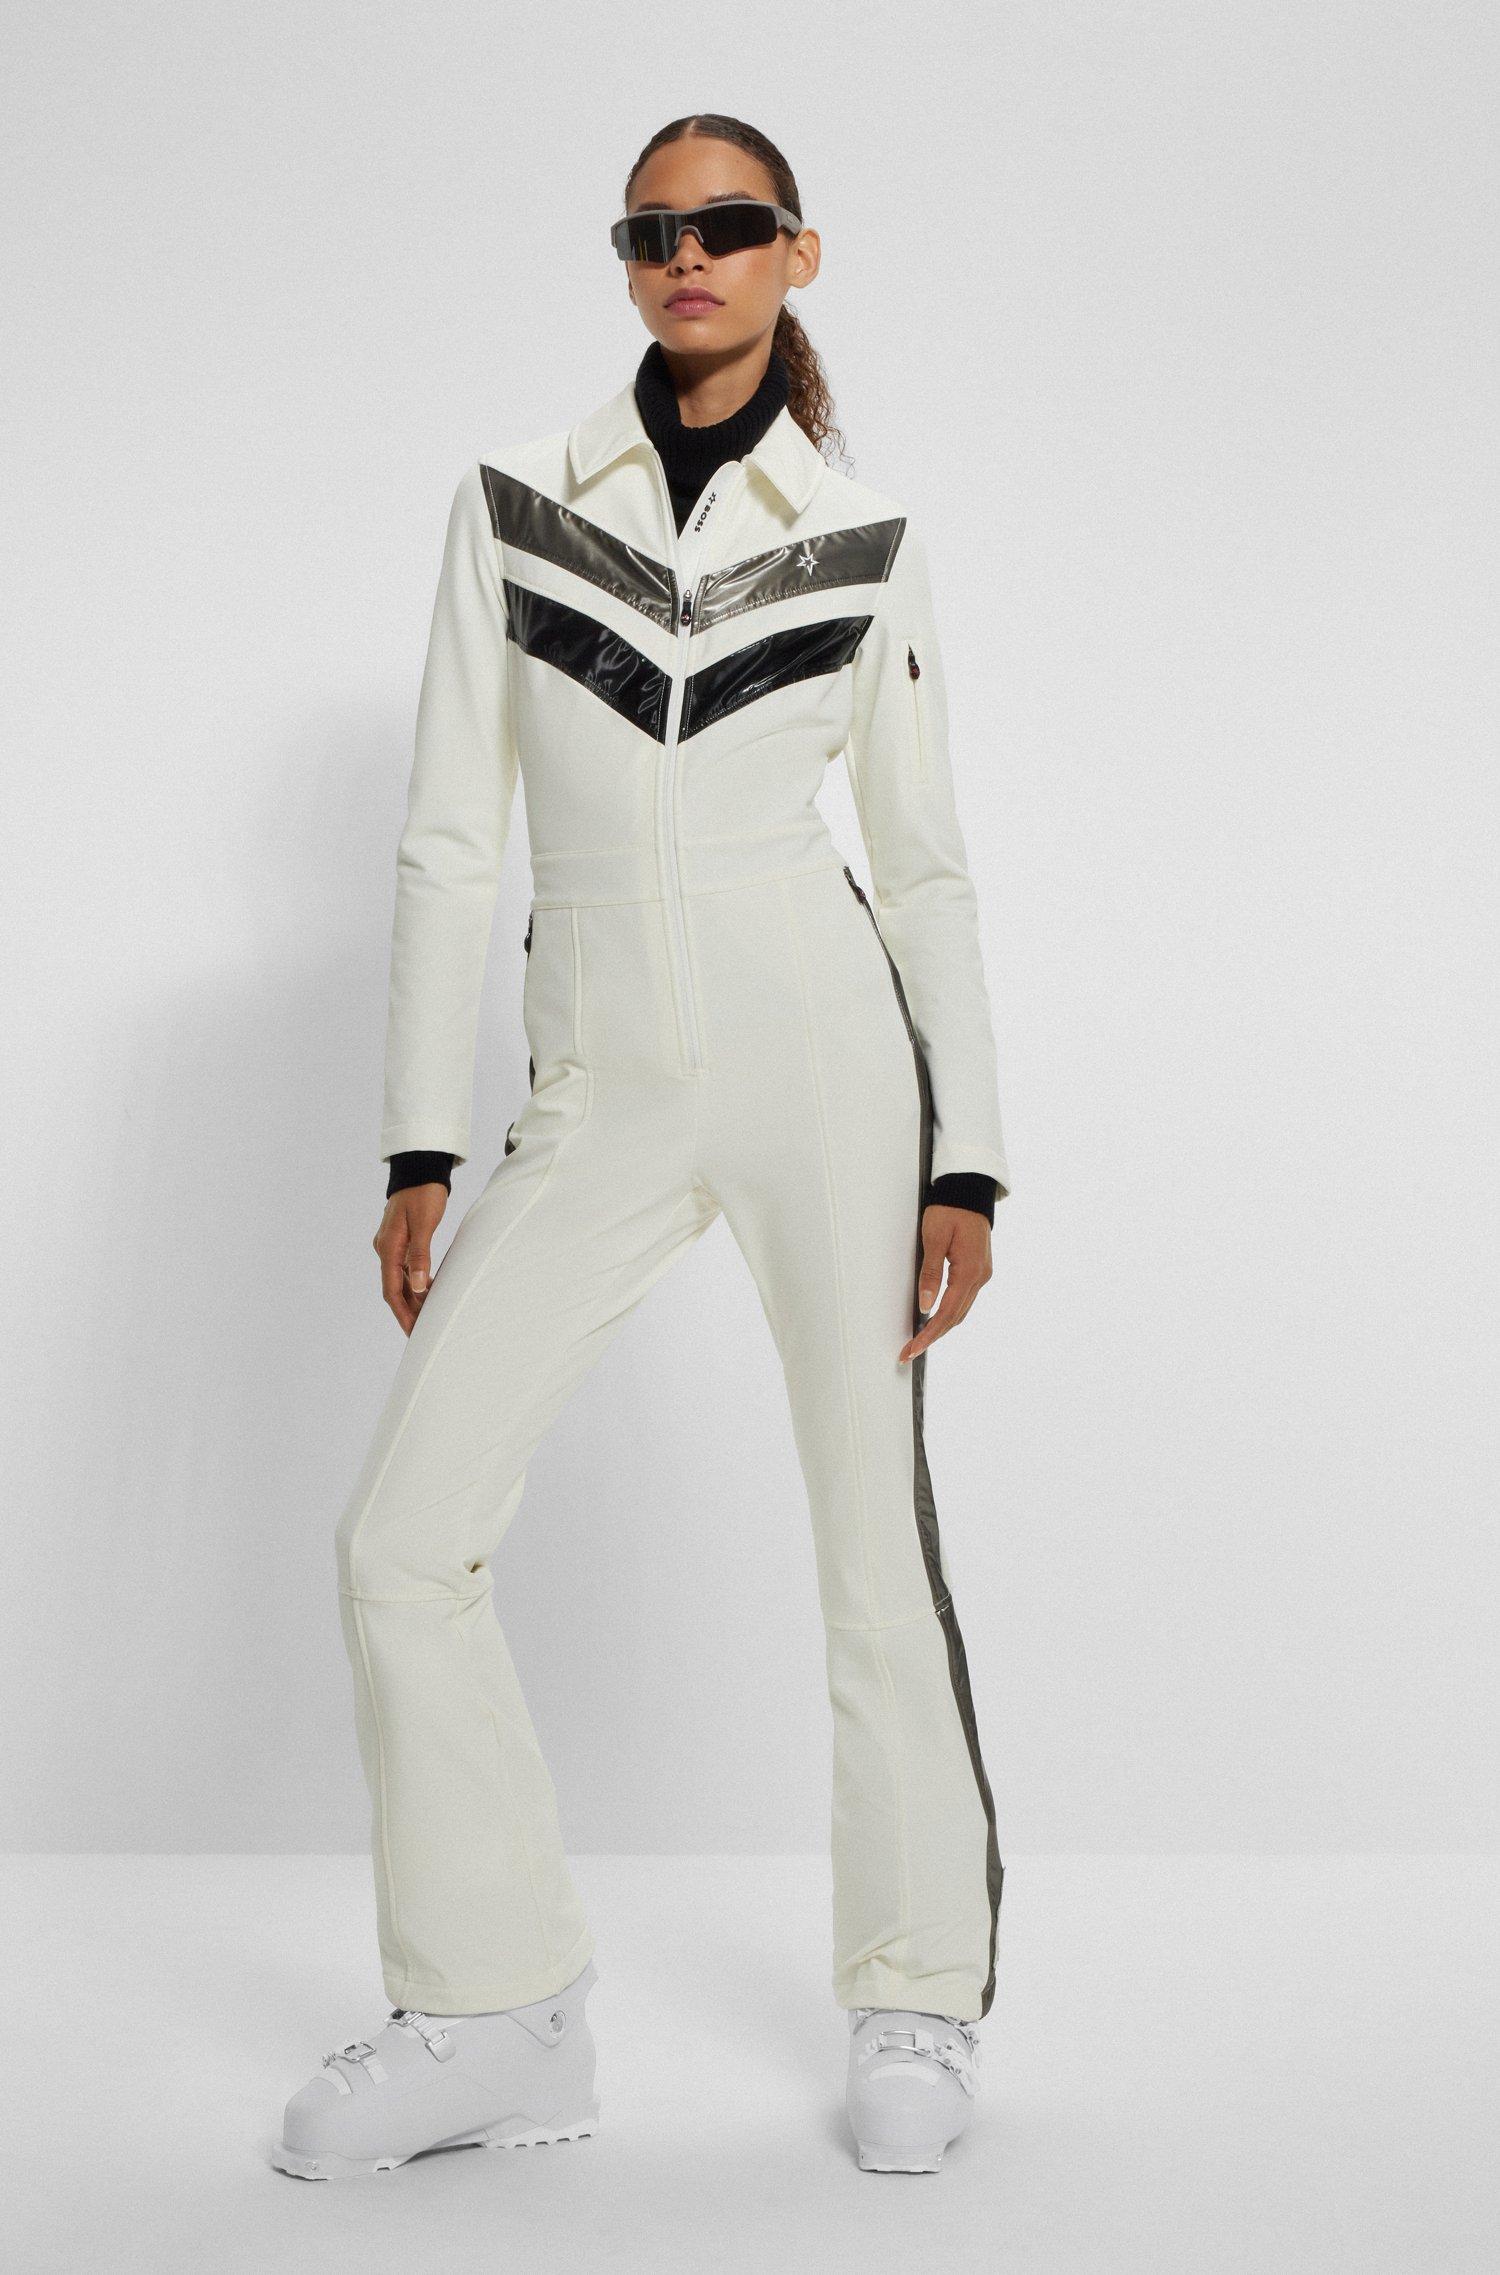 BOSS X Perfect Moment Branded Ski Suit With Stripes in White